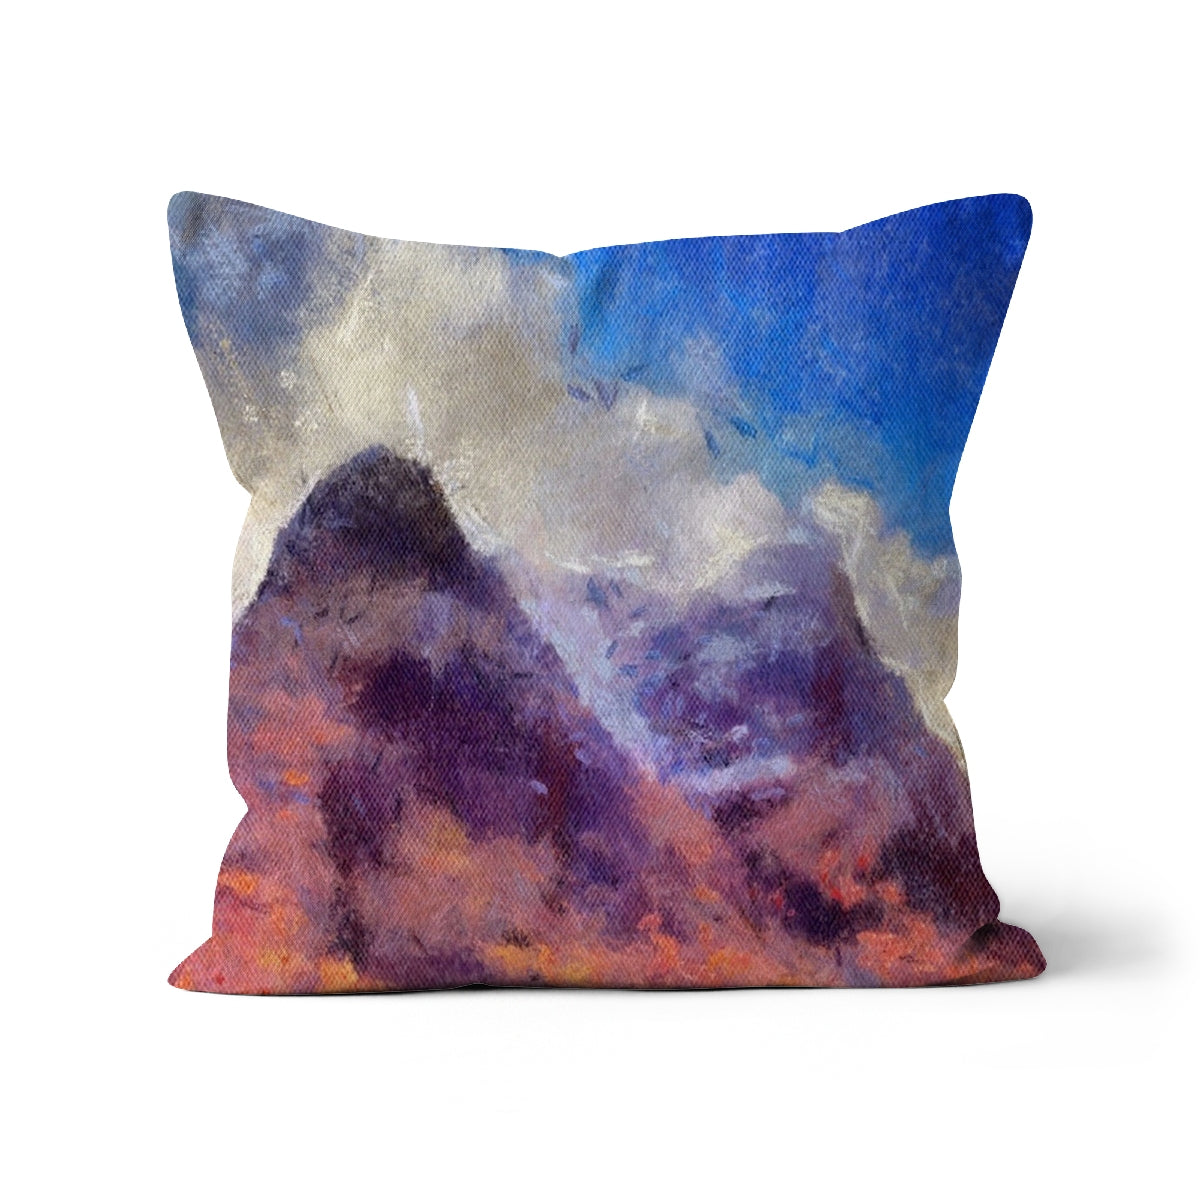 Glencoe Art Gifts Cushion-Cushions-Glencoe Art Gallery-Faux Suede-16"x16"-Paintings, Prints, Homeware, Art Gifts From Scotland By Scottish Artist Kevin Hunter